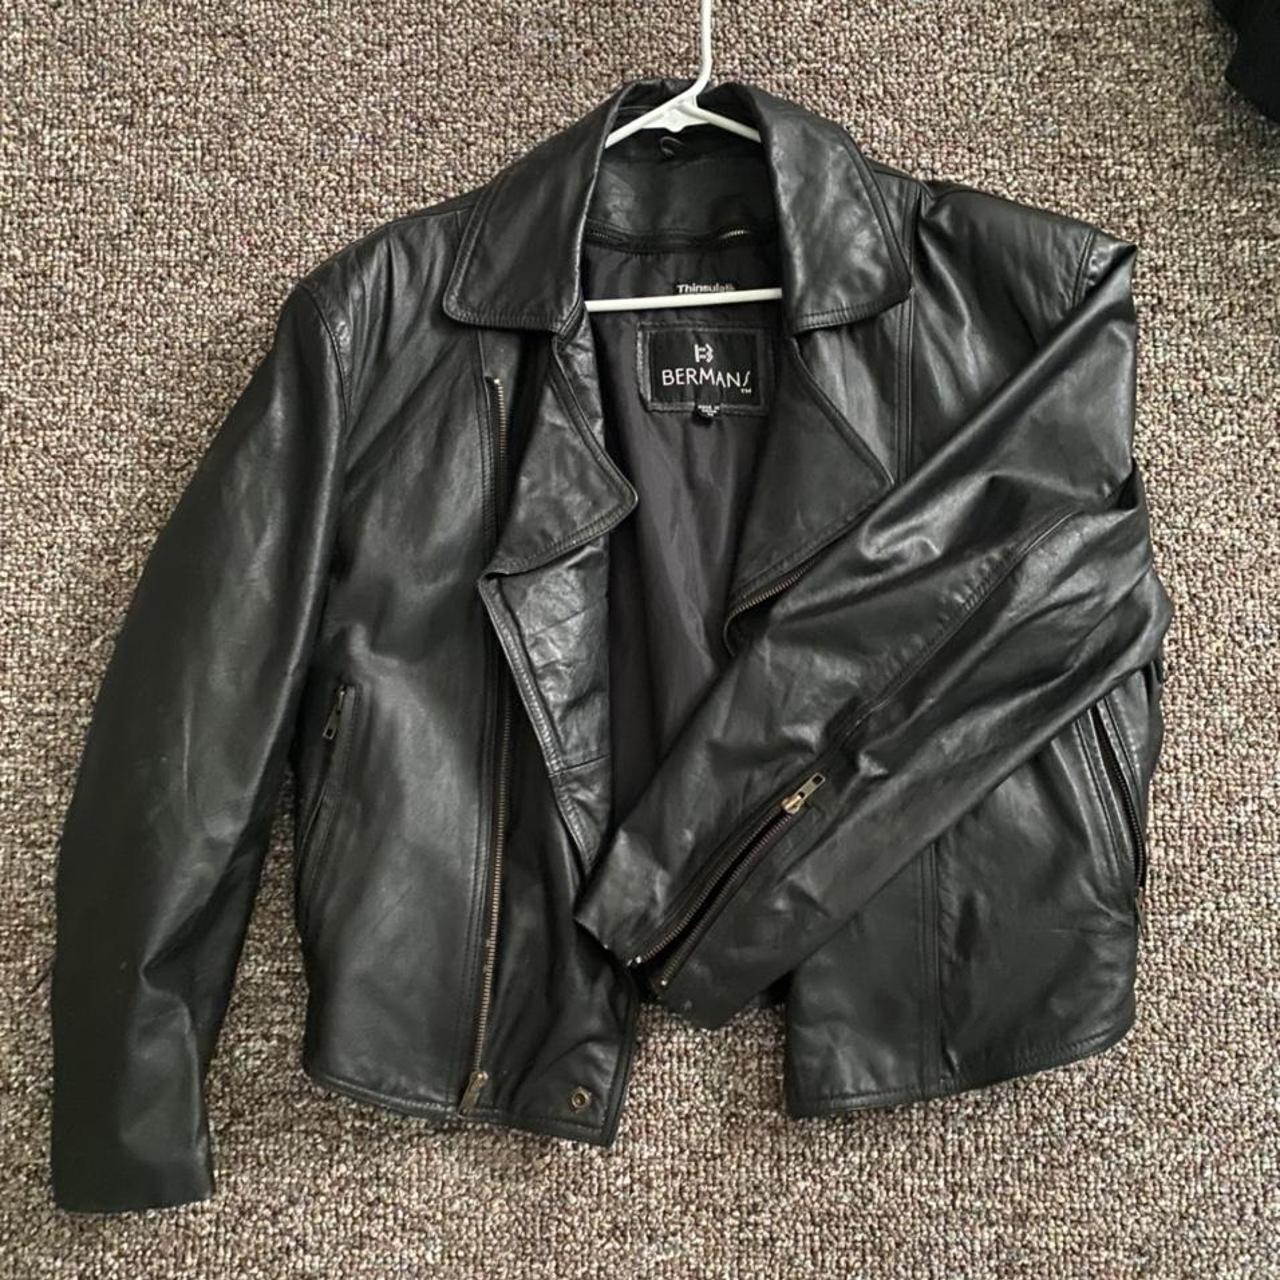 Product Image 1 - Bermans thinsulate Leather Jacket 
Never